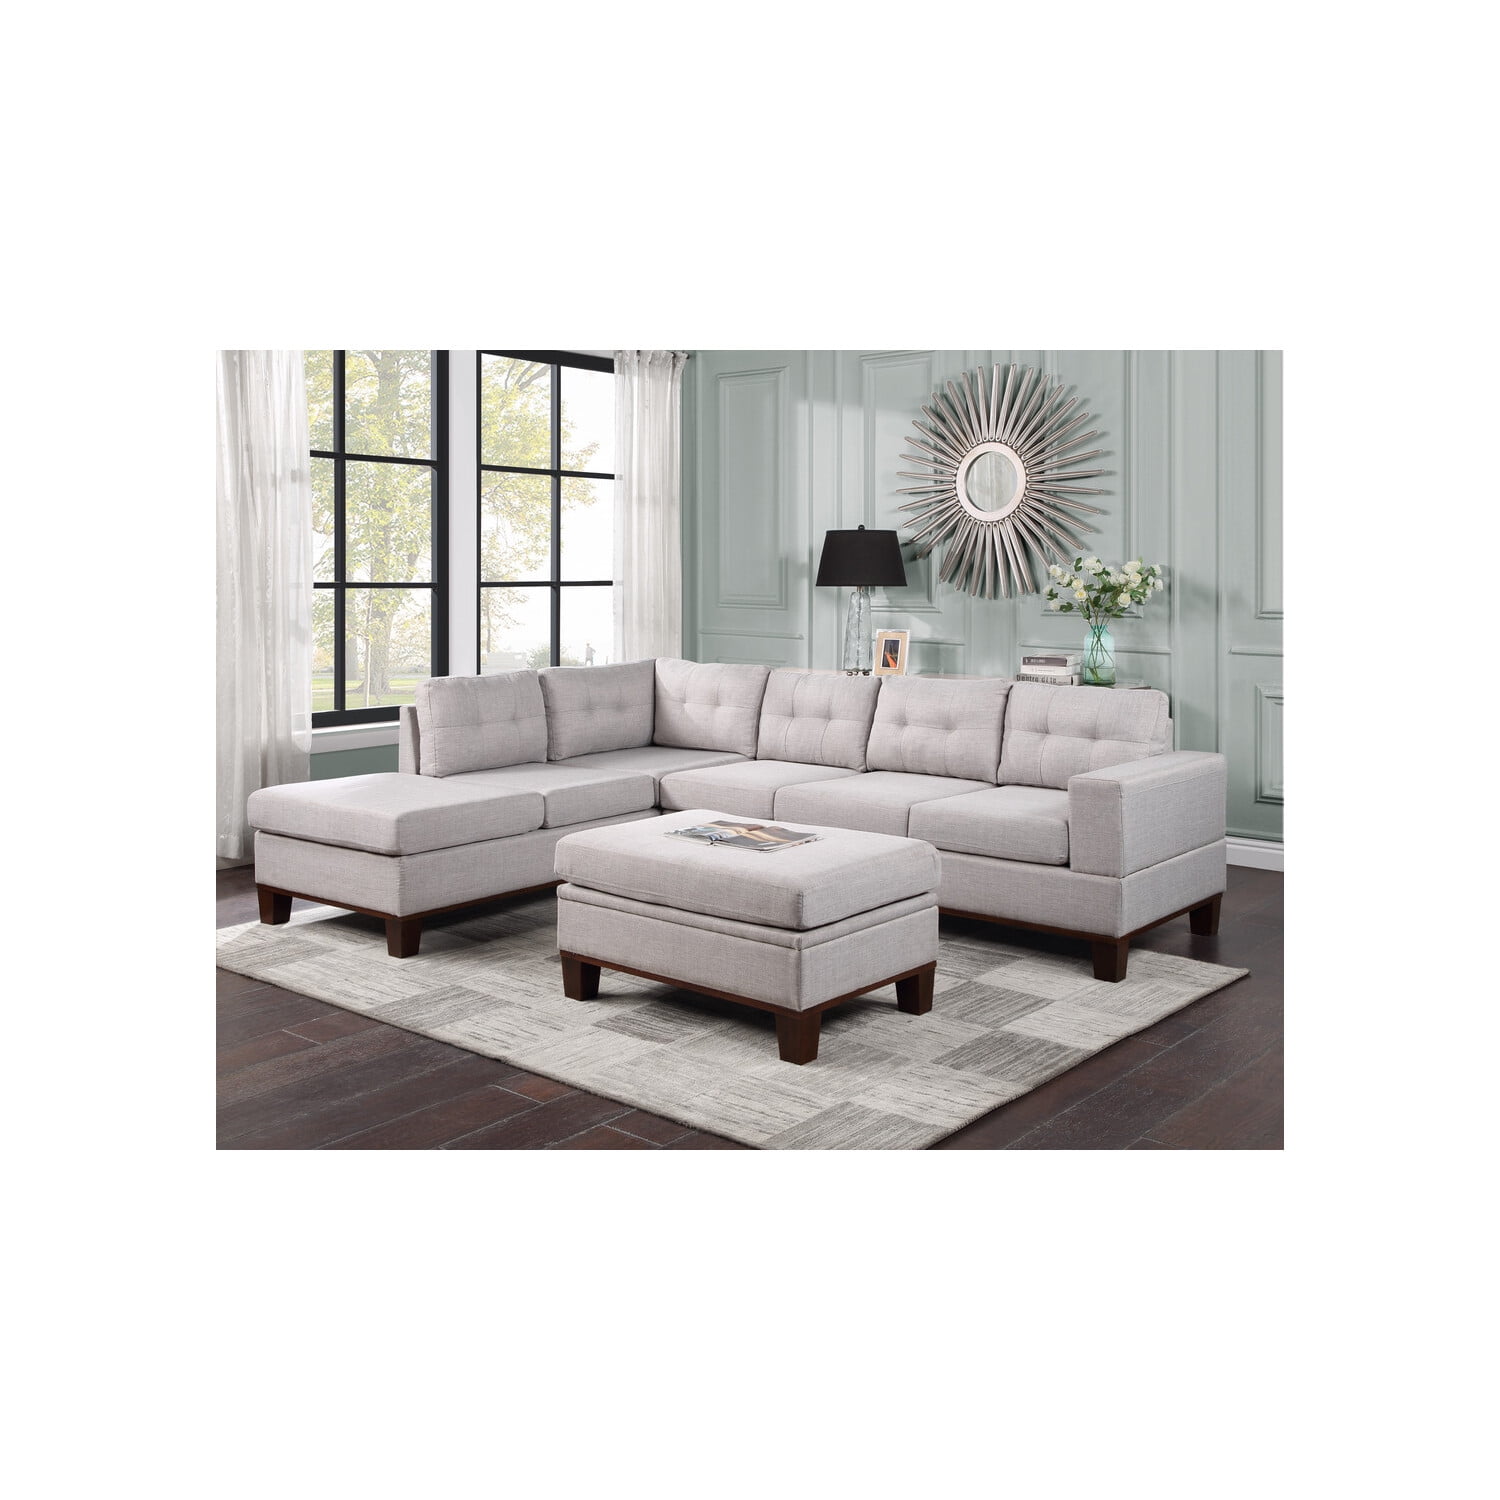 Lilola Home Hilo Fabric Reversible Sectional Sofa with Dropdown